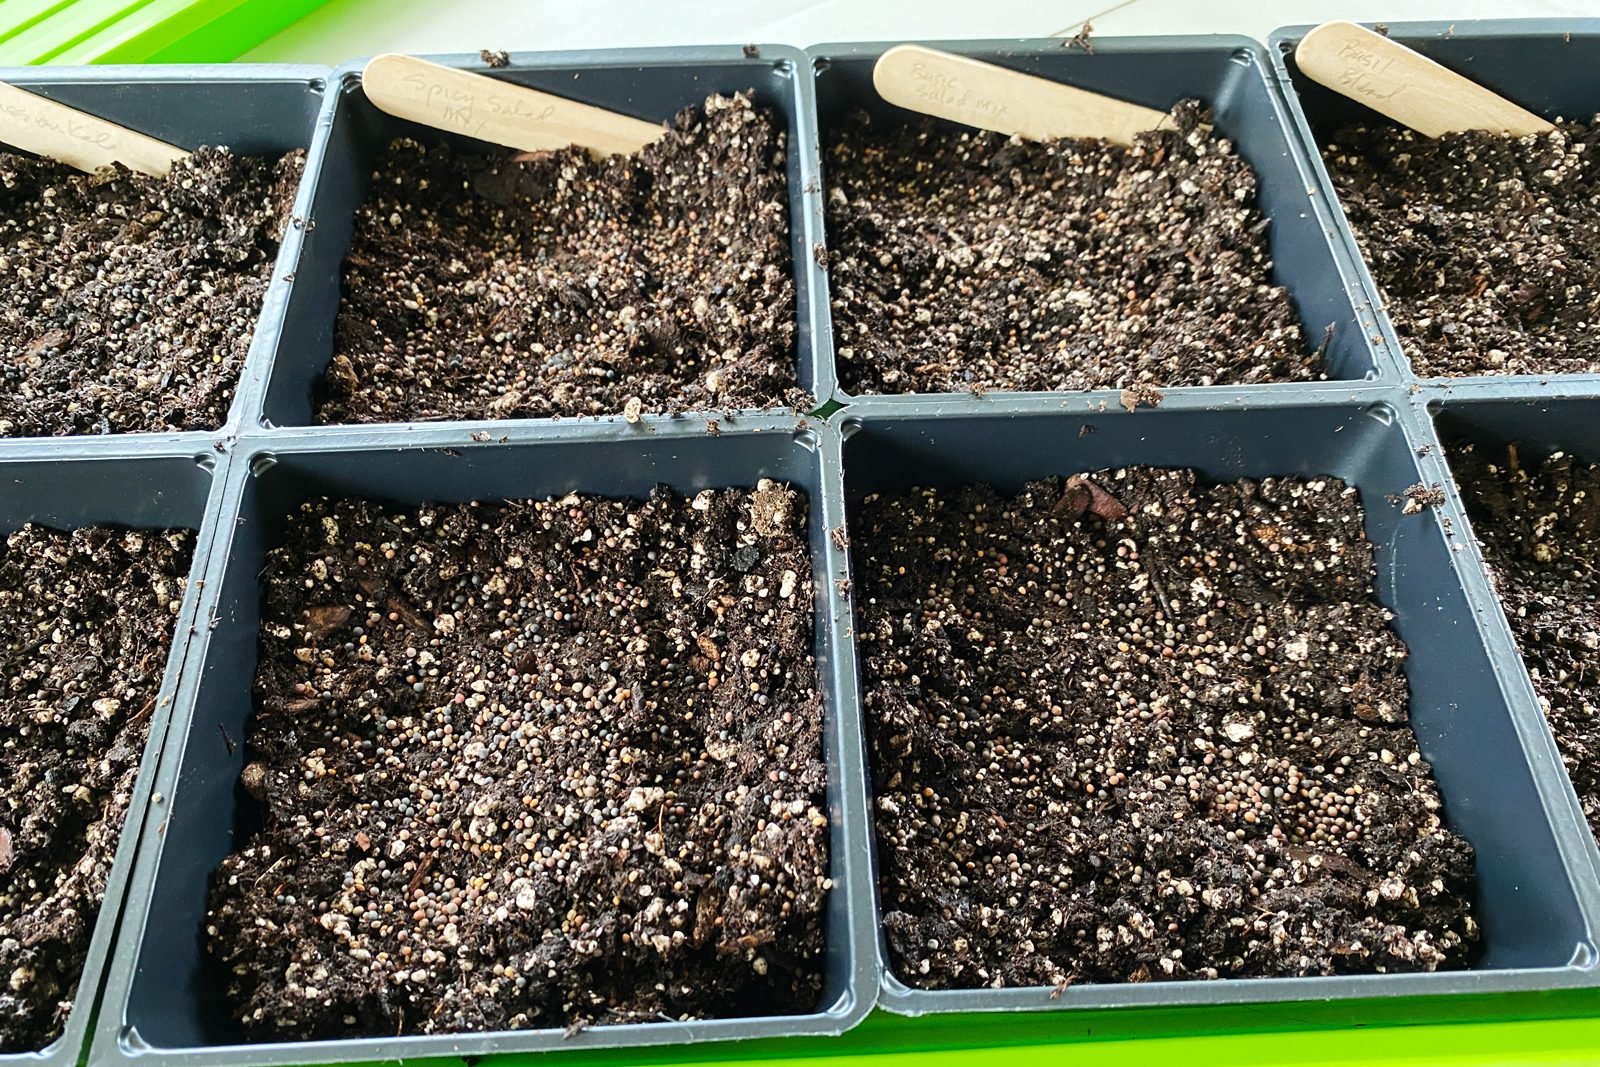 sowing micro green seeds in black planter tray filled with soil